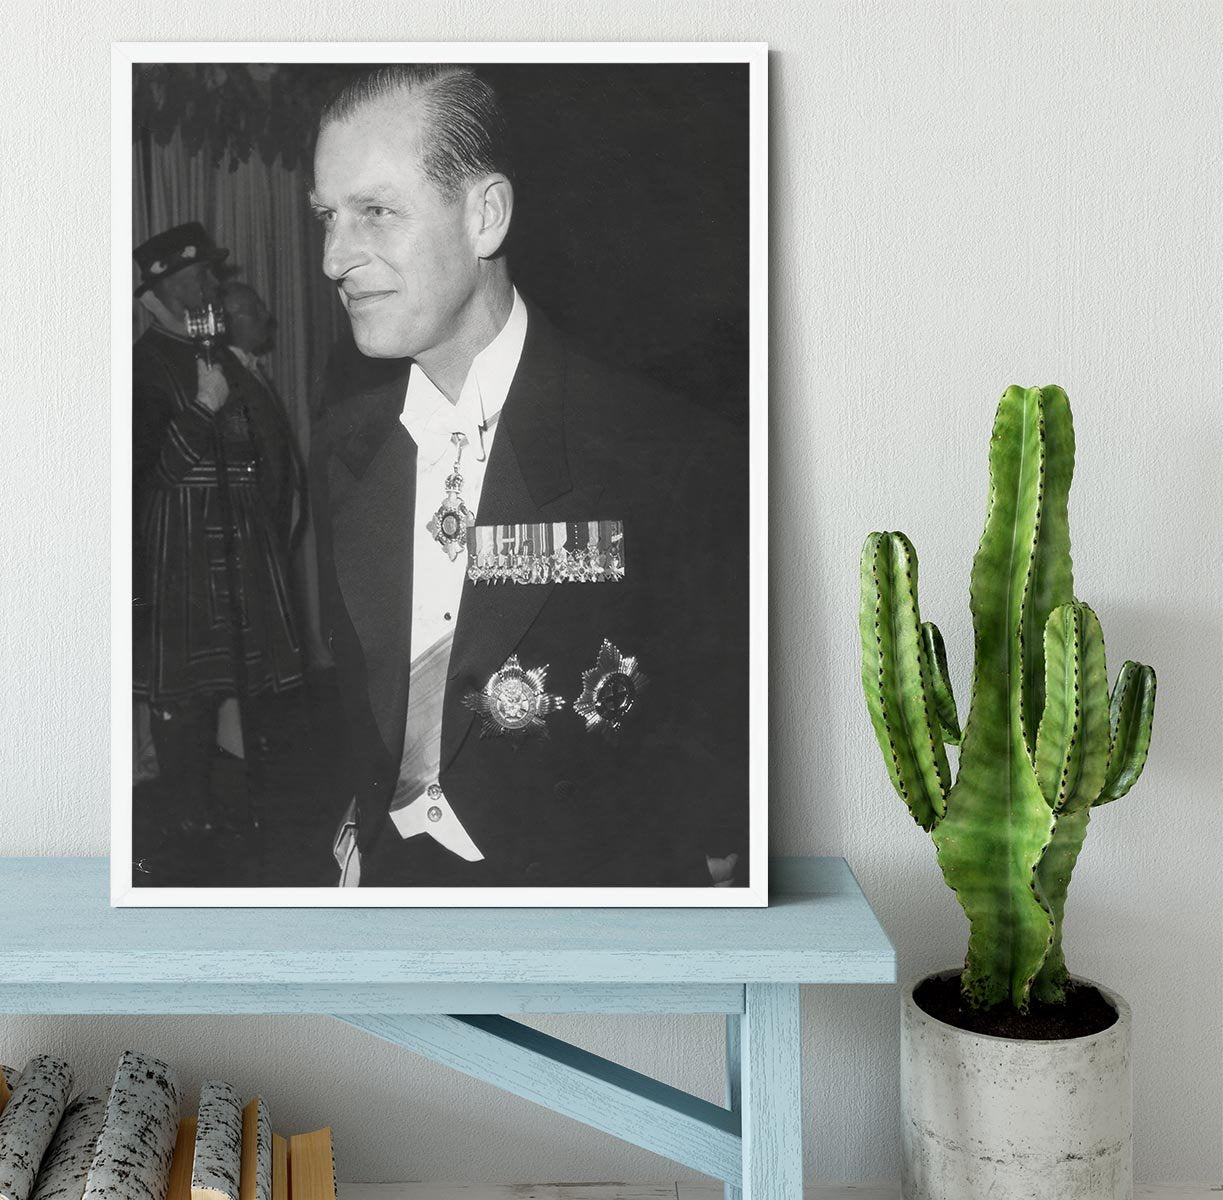 Prince Philip attending the opera at Covent Garden Framed Print - Canvas Art Rocks -6